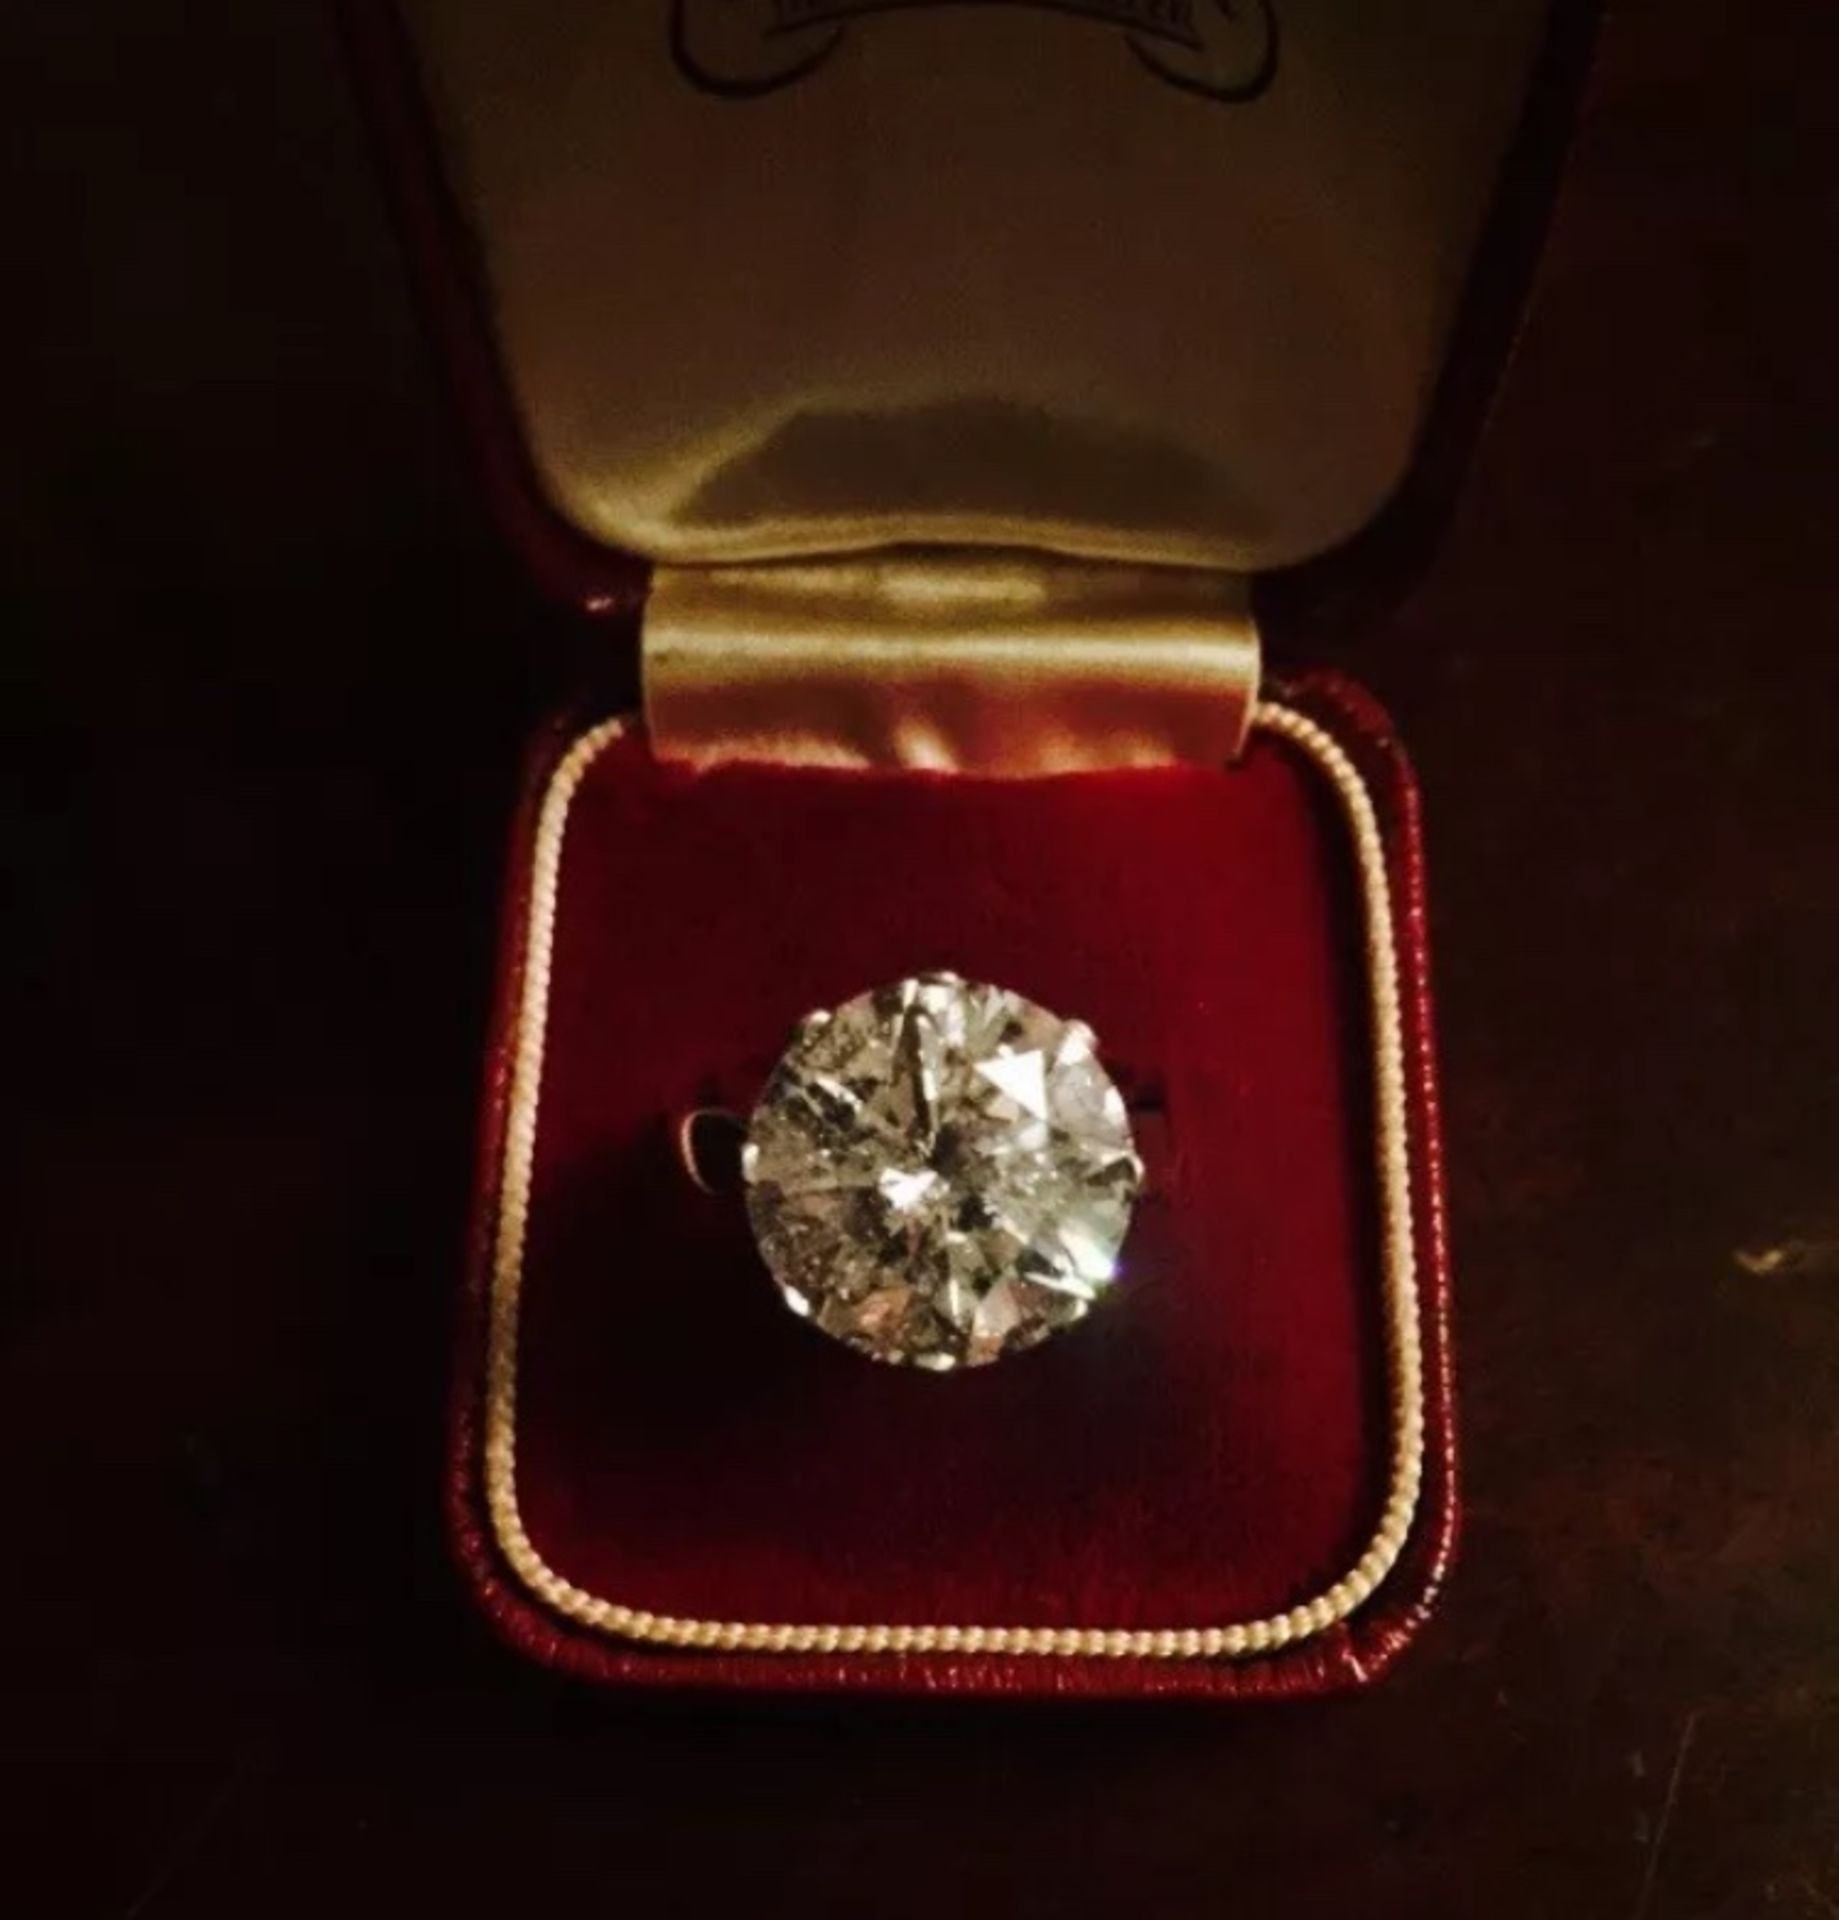 8.01 Carat Solitaire Diamond Engagement Ring, Including Gemology Certificate - Image 2 of 11